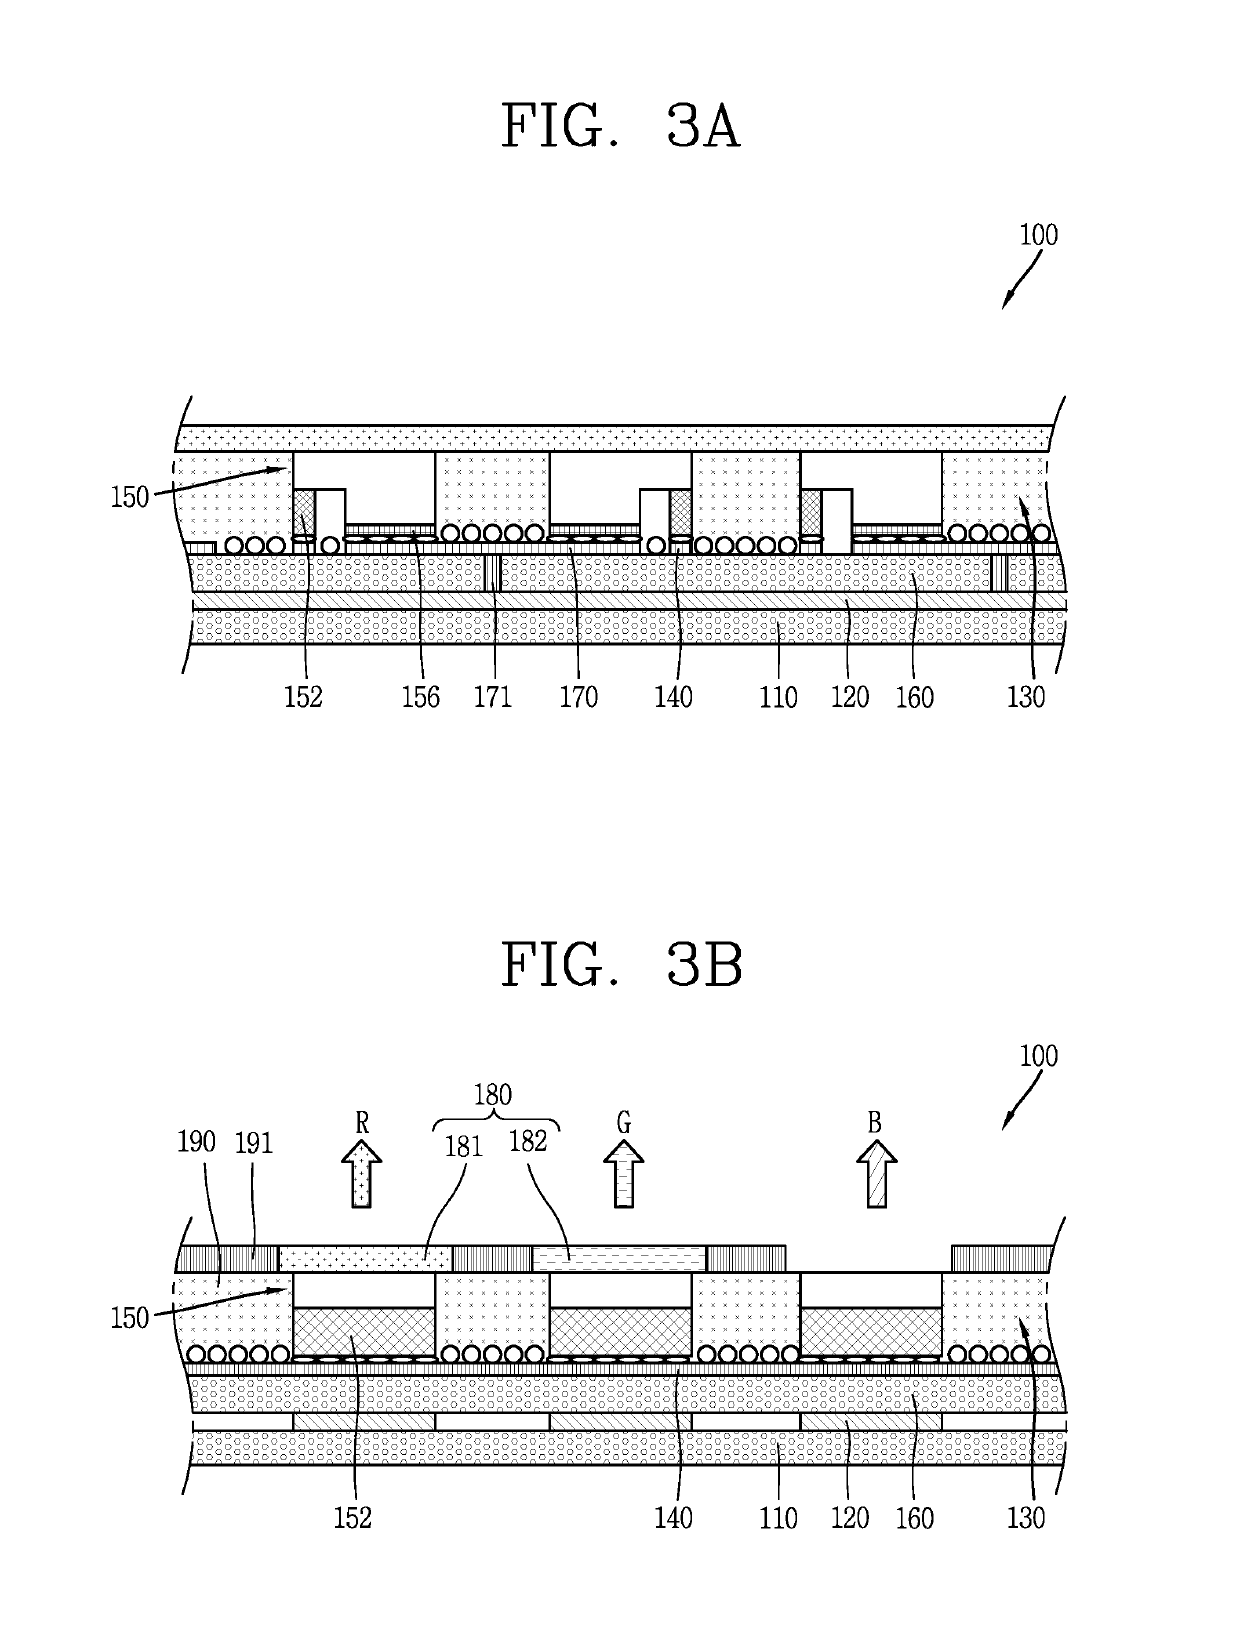 Display device using semiconductor light emitting device